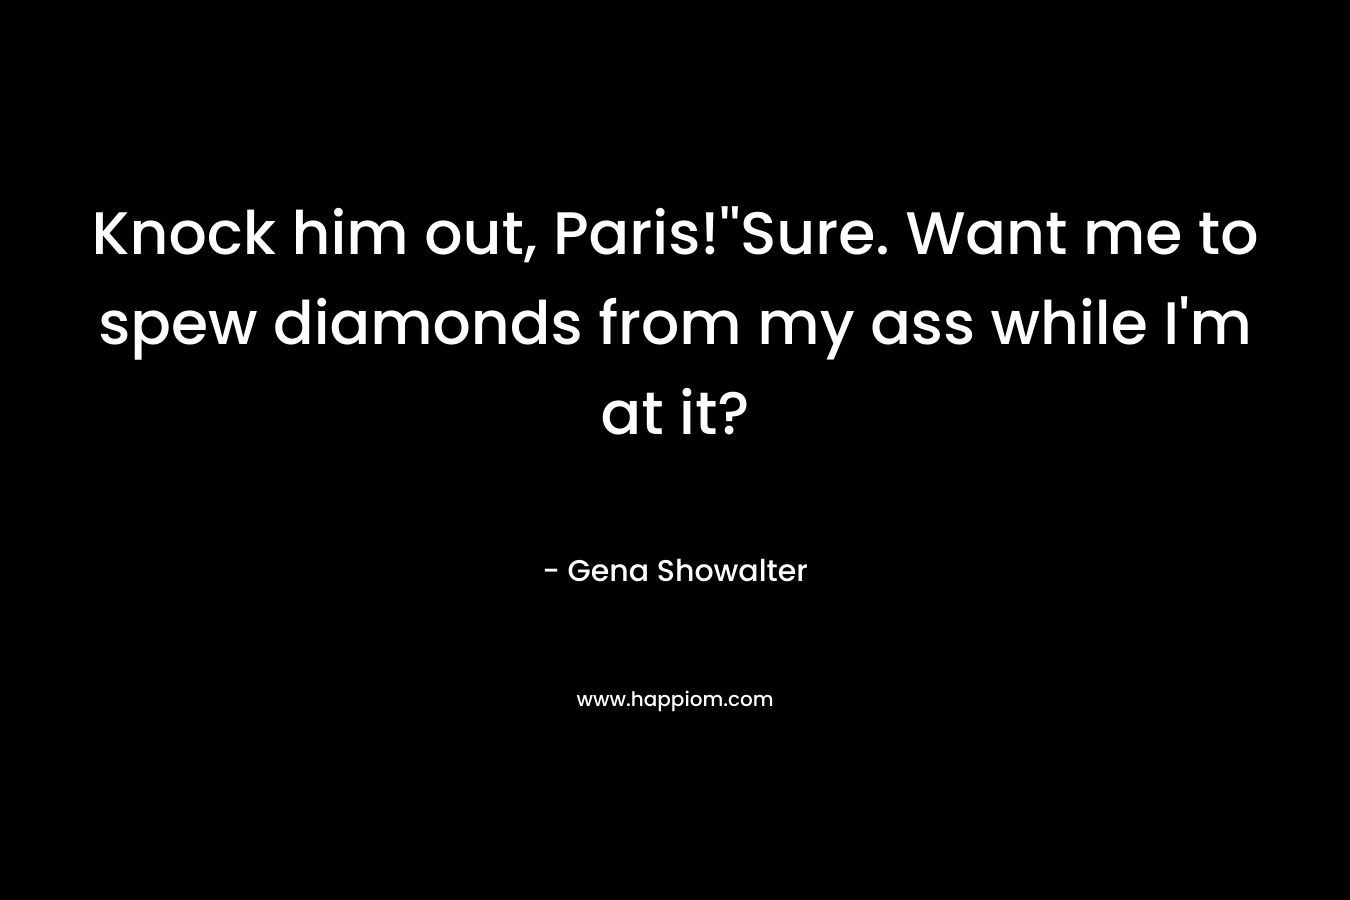 Knock him out, Paris!”Sure. Want me to spew diamonds from my ass while I’m at it? – Gena Showalter